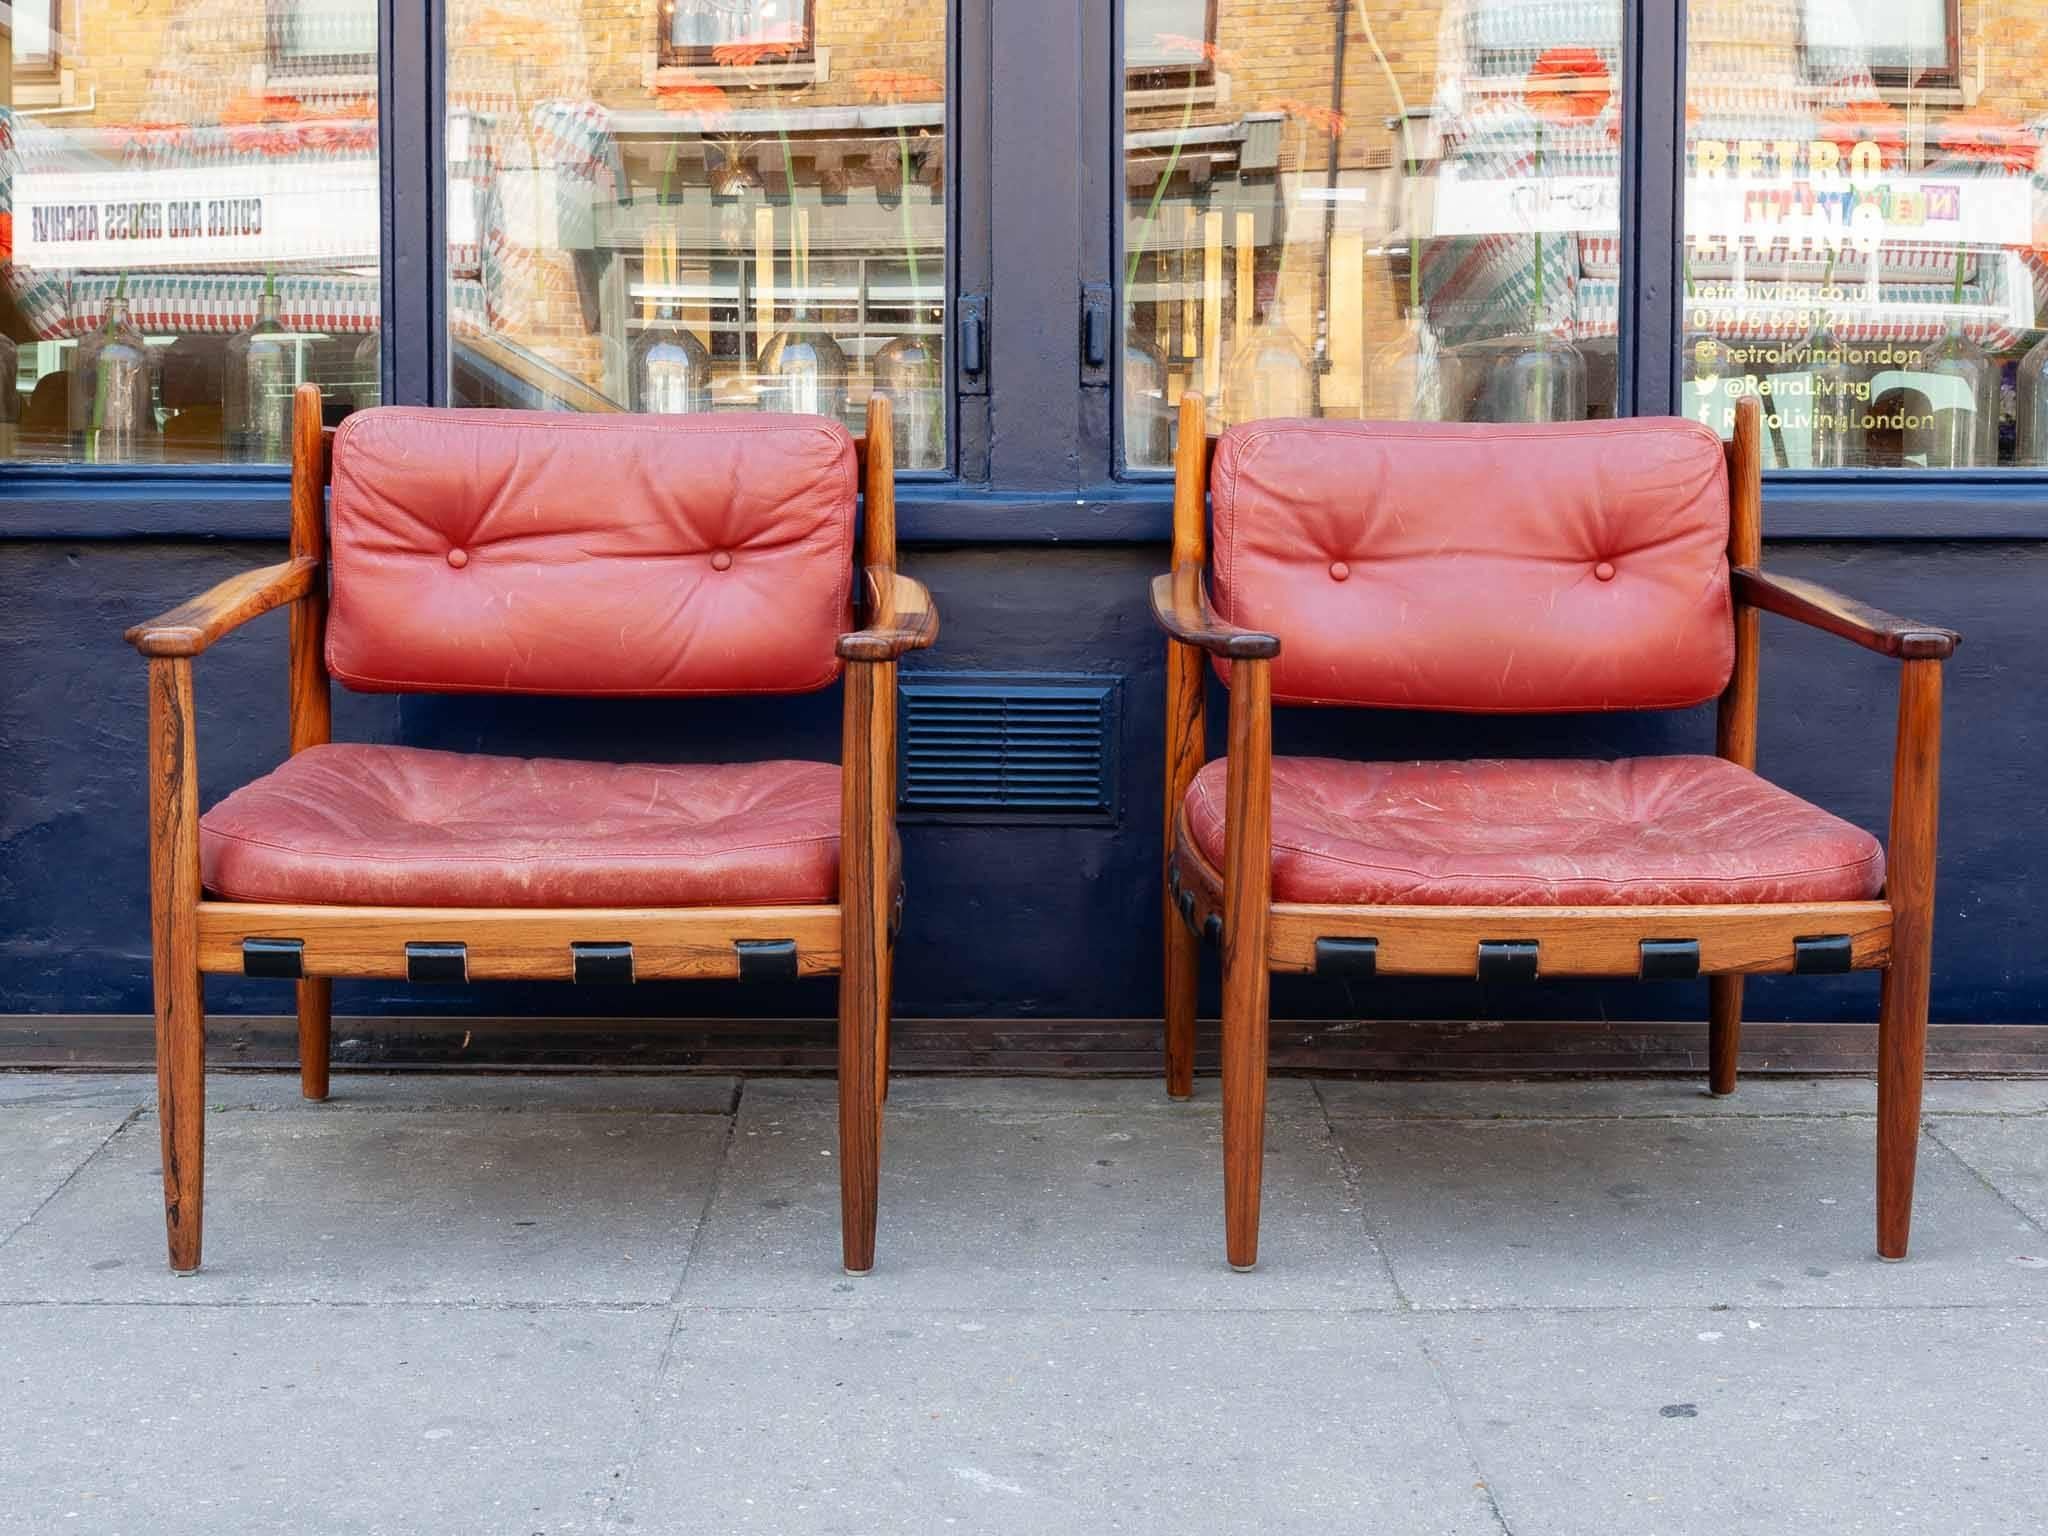 A pair of 1960s Swedish Rosewood and red leather upholstered armchairs produced by Ire Mobler in Skillingaryd. Labelled. These Cadett armchairs designed by Eric Merthen in solid rosewood. In very good vintage condition with some wear to the leather